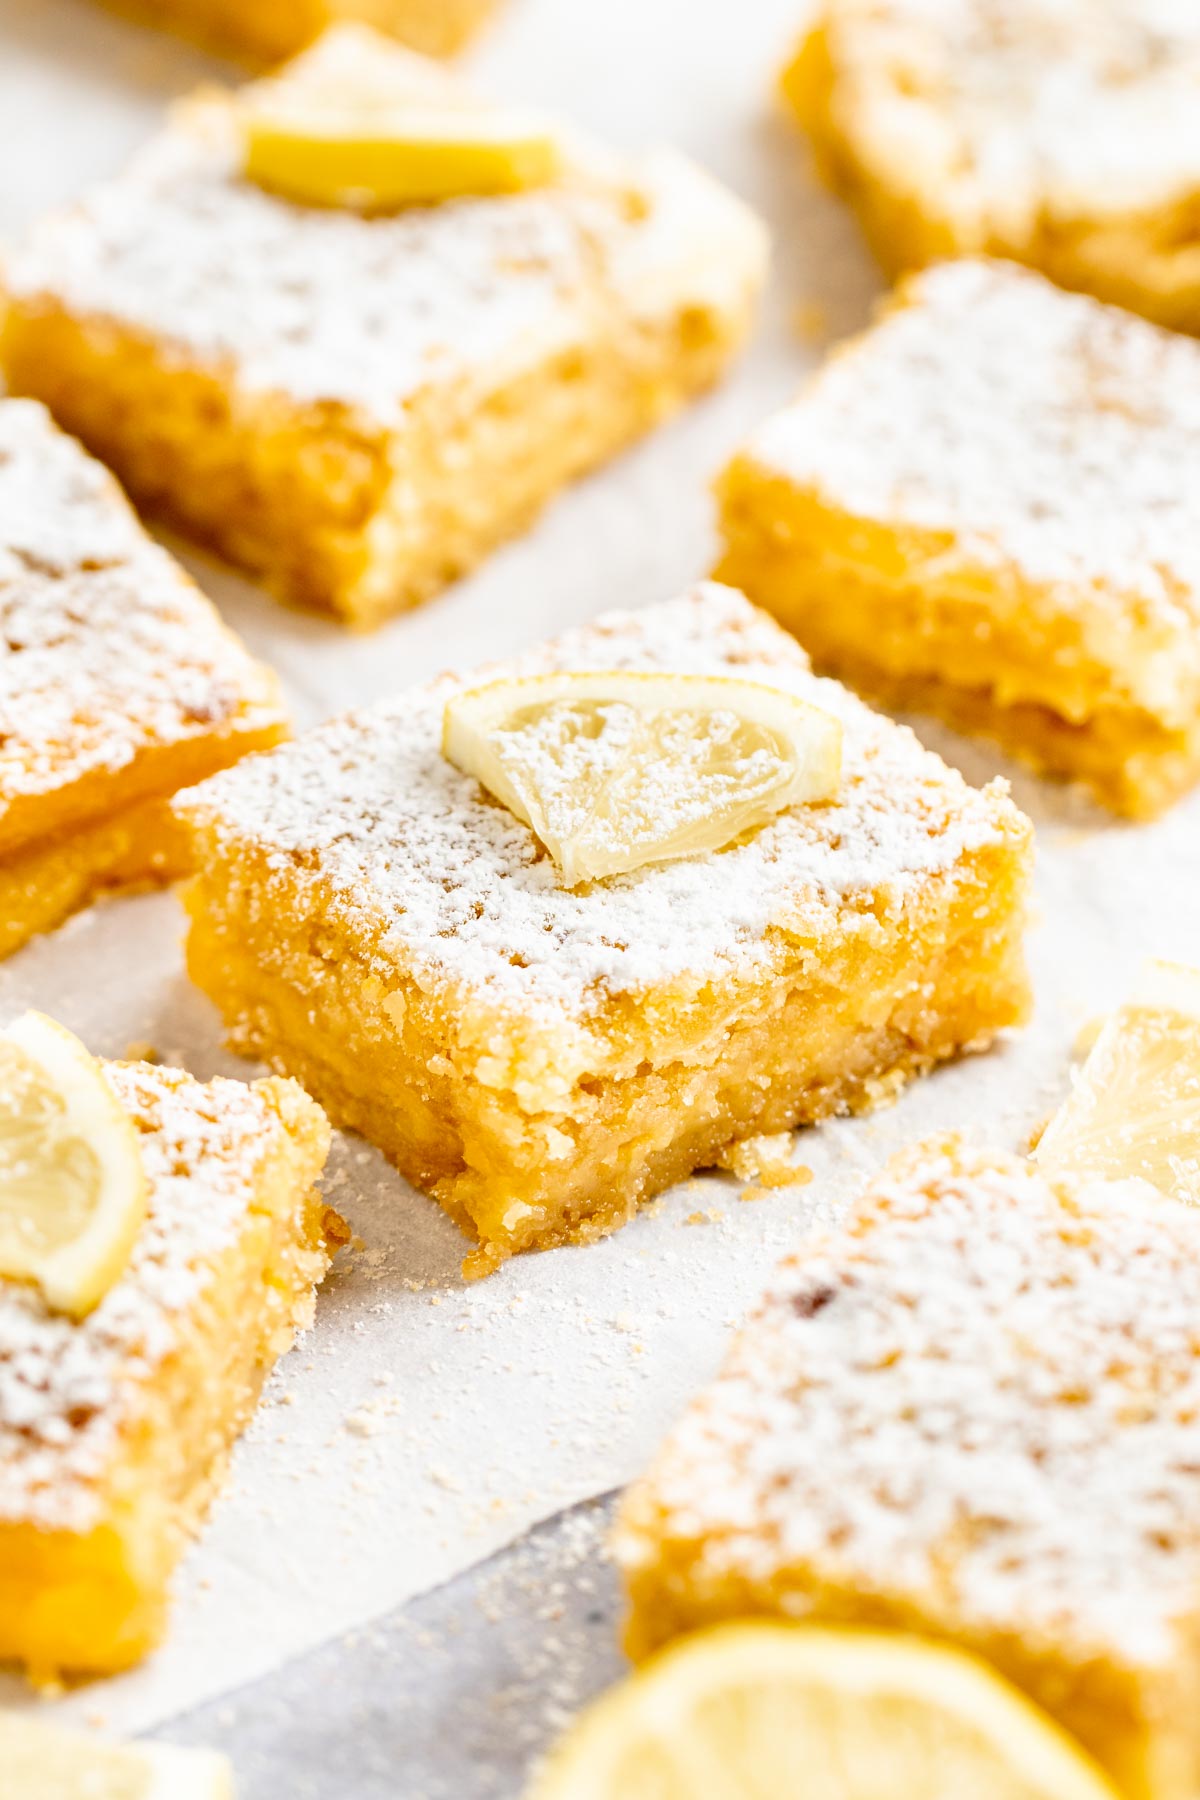 Slices of lemon bars with graham cracker crust on parchment paper.